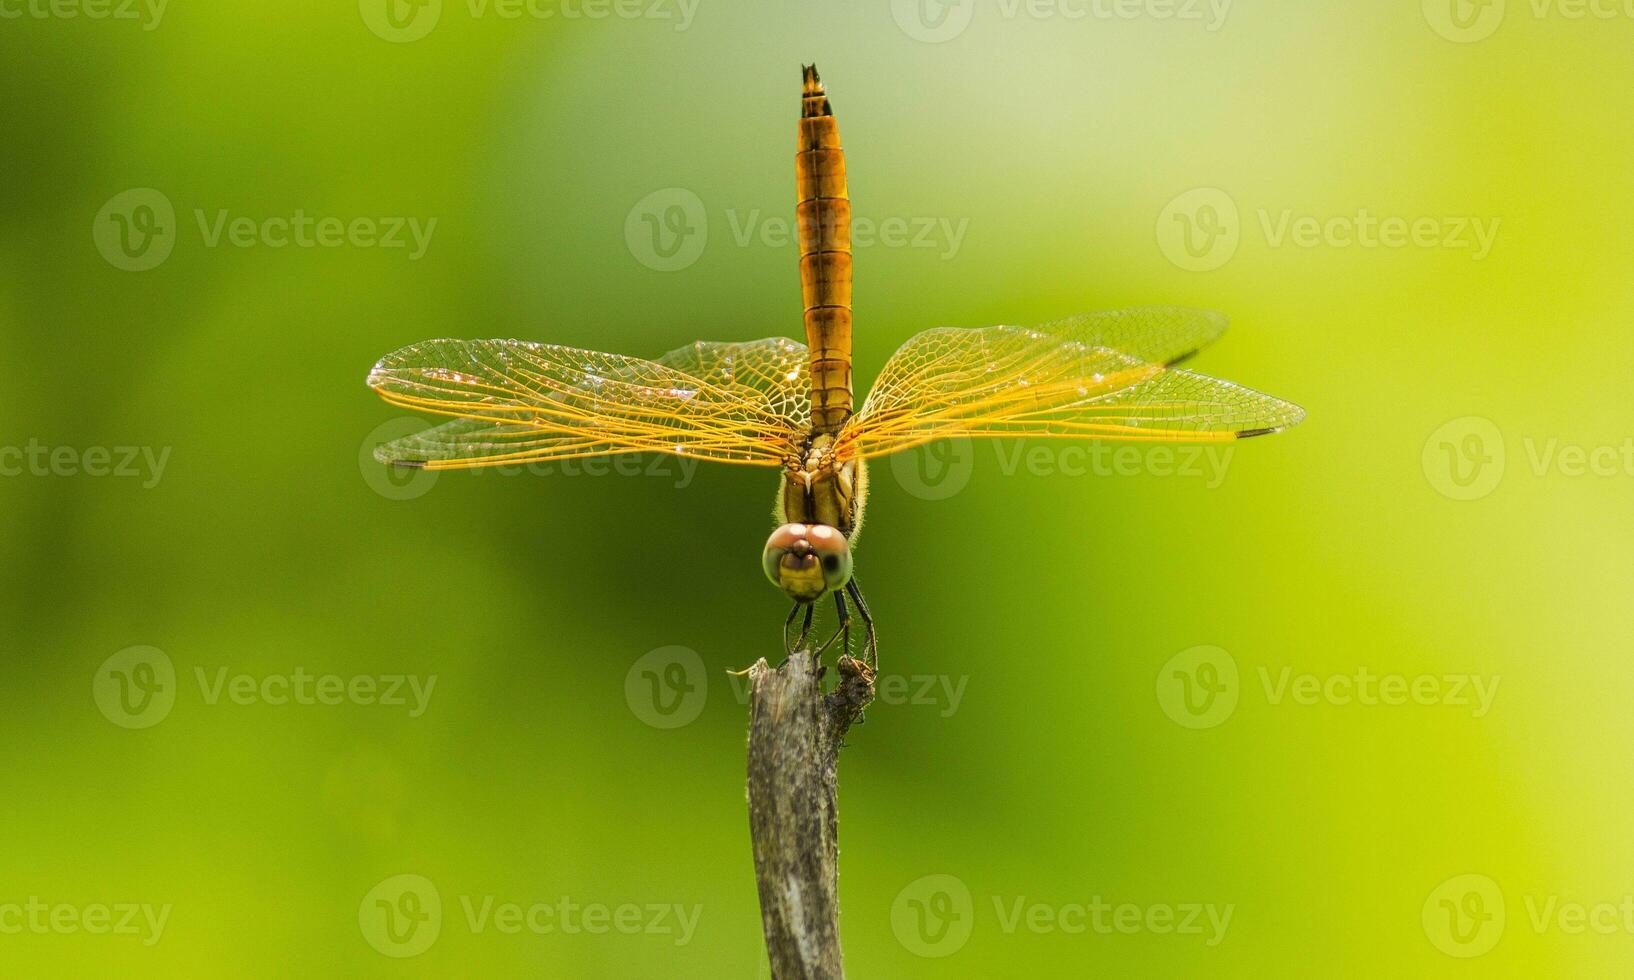 Very detailed macro photo of a dragonfly. Macro shot, showing details of the dragonfly's eyes and wings. Beautiful dragonfly in natural habitat